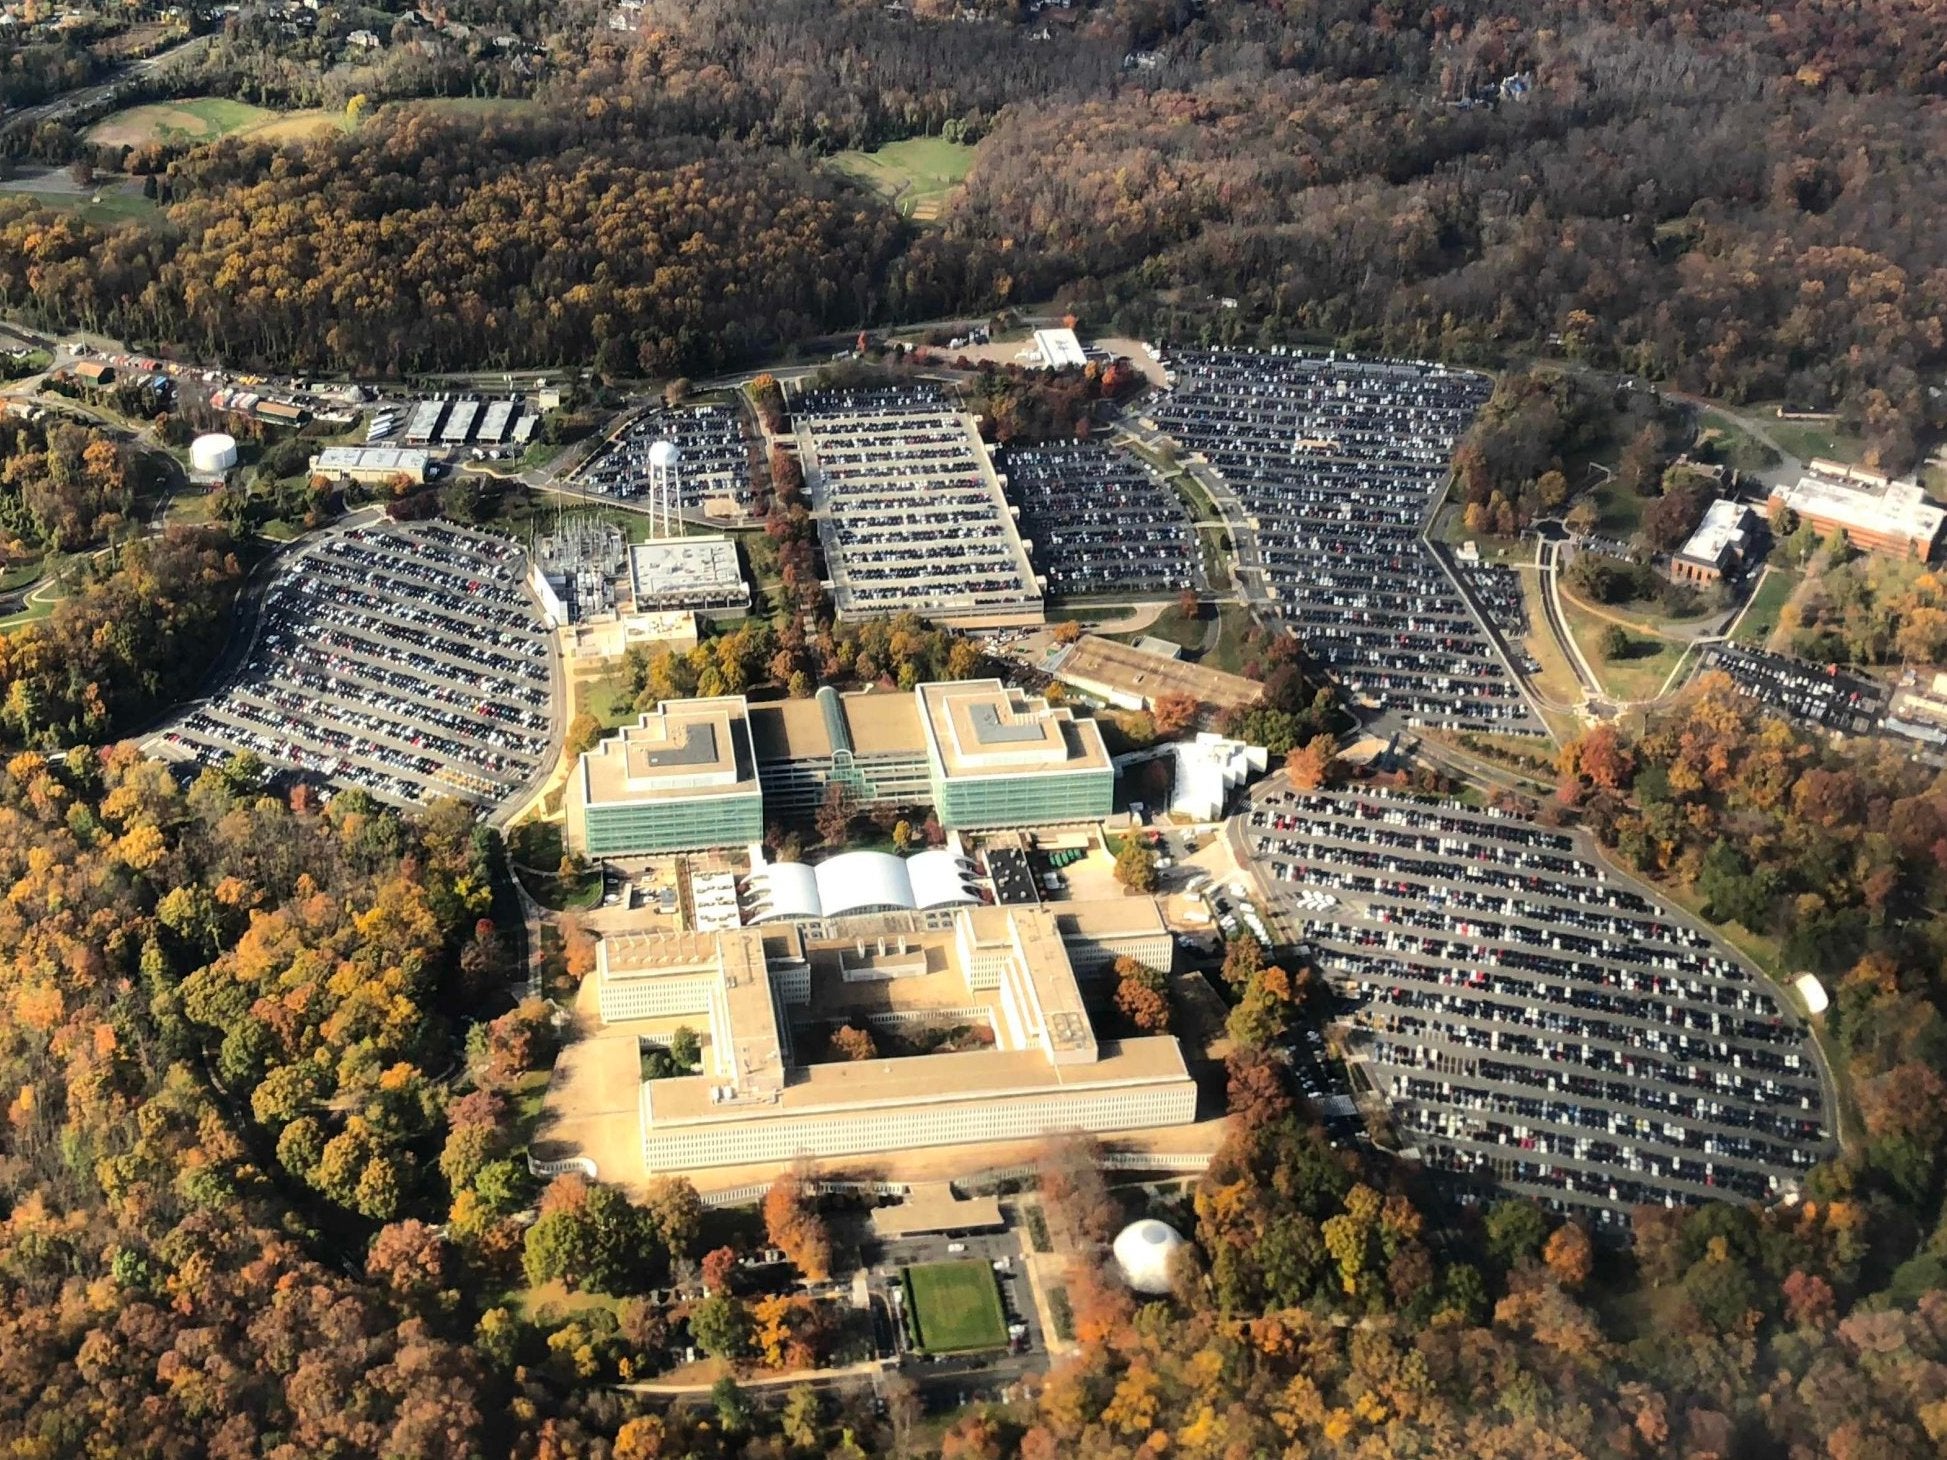 The headquarters of the US Central Intelligence Agency (CIA) in Langley, Virginia